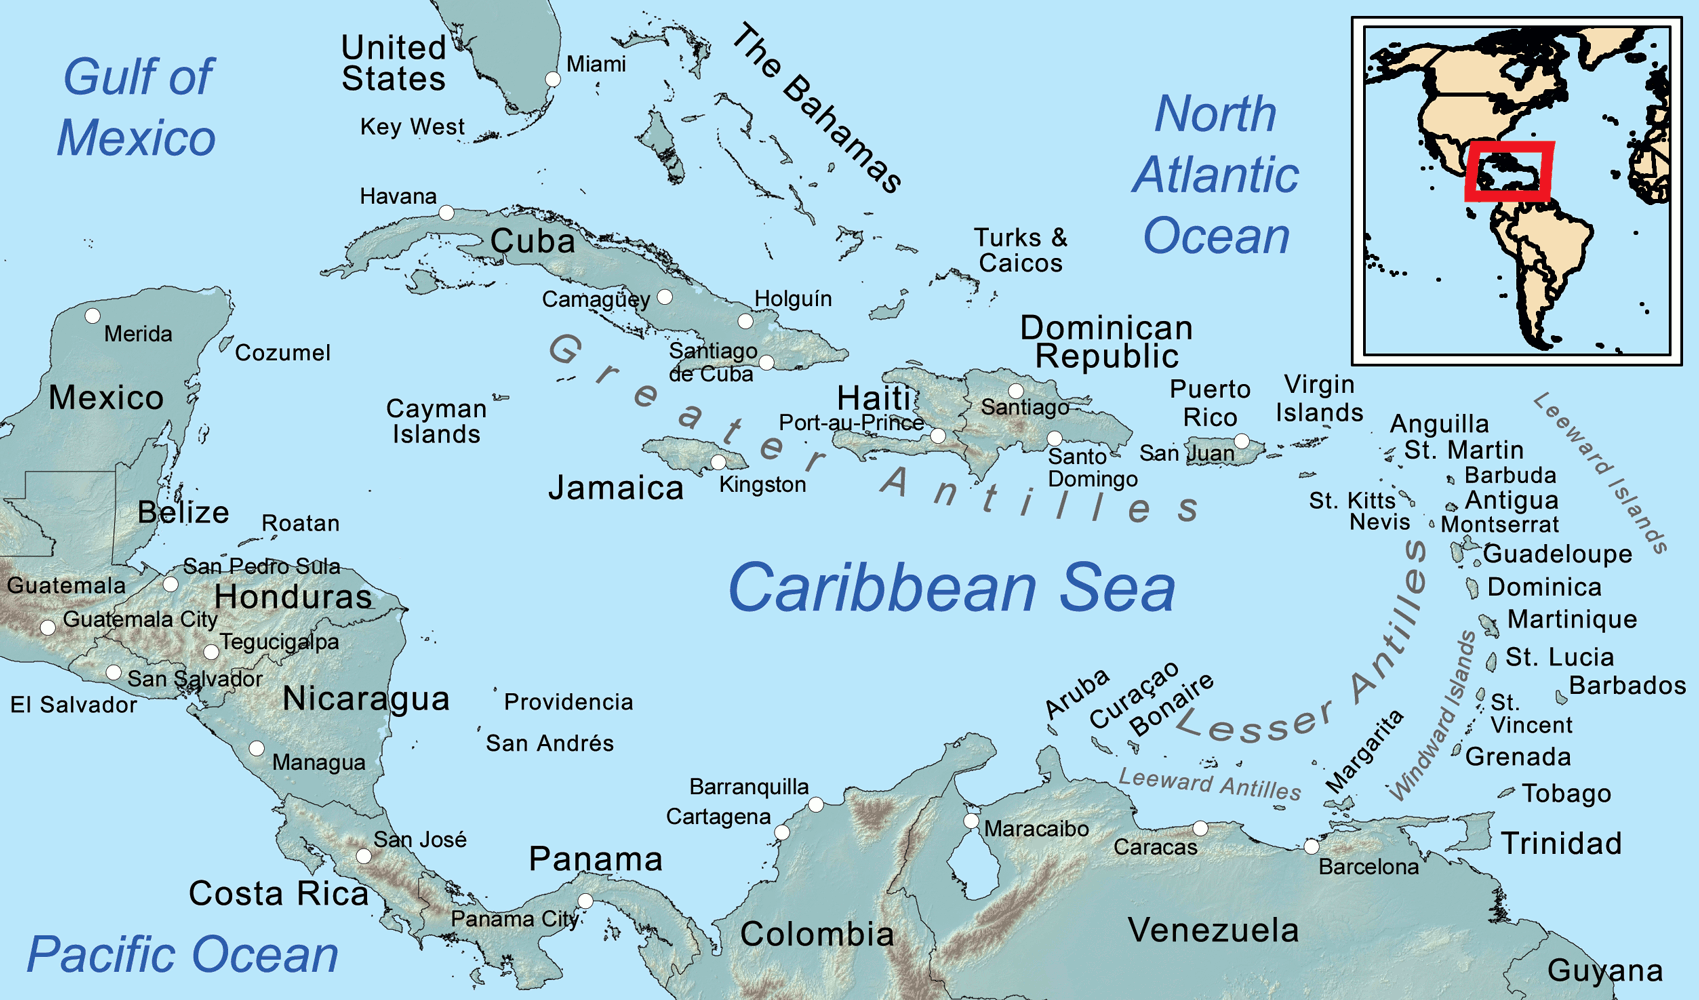 24103708 6 saint kitts and nevis map